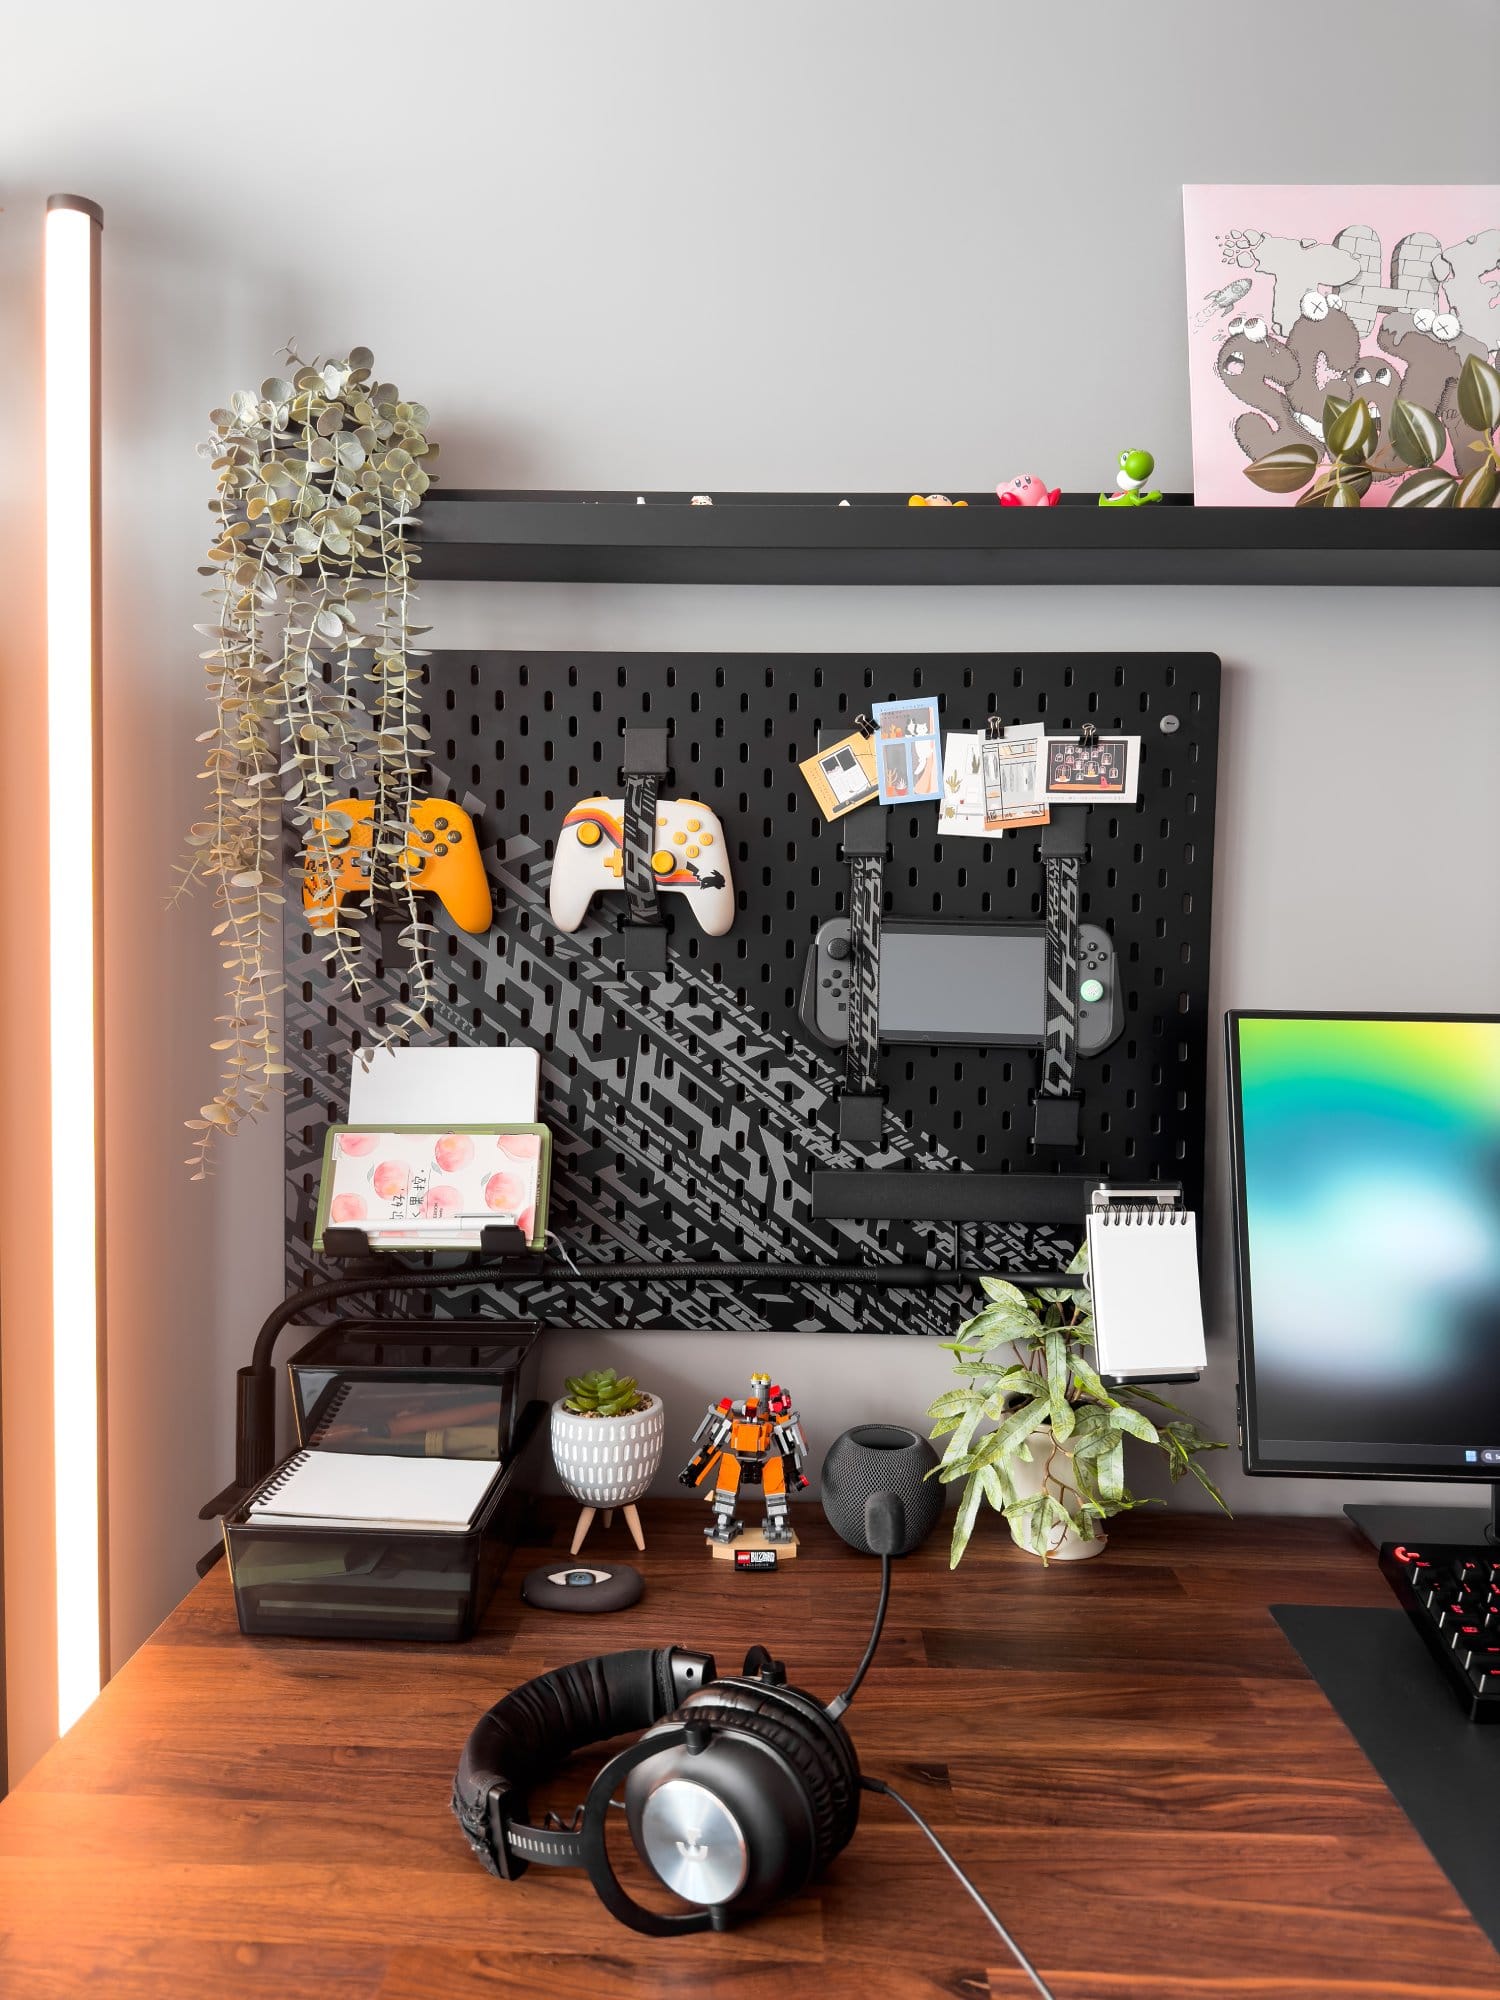 A close-up of a modern desk setup featuring a Dell monitor, Logitech G Pro X headphones, and an IKEA UPPSPEL pegboard holding controllers, notes, and a Nintendo Switch, alongside plants and decorative items, all arranged on a wooden IKEA KARLBY desk